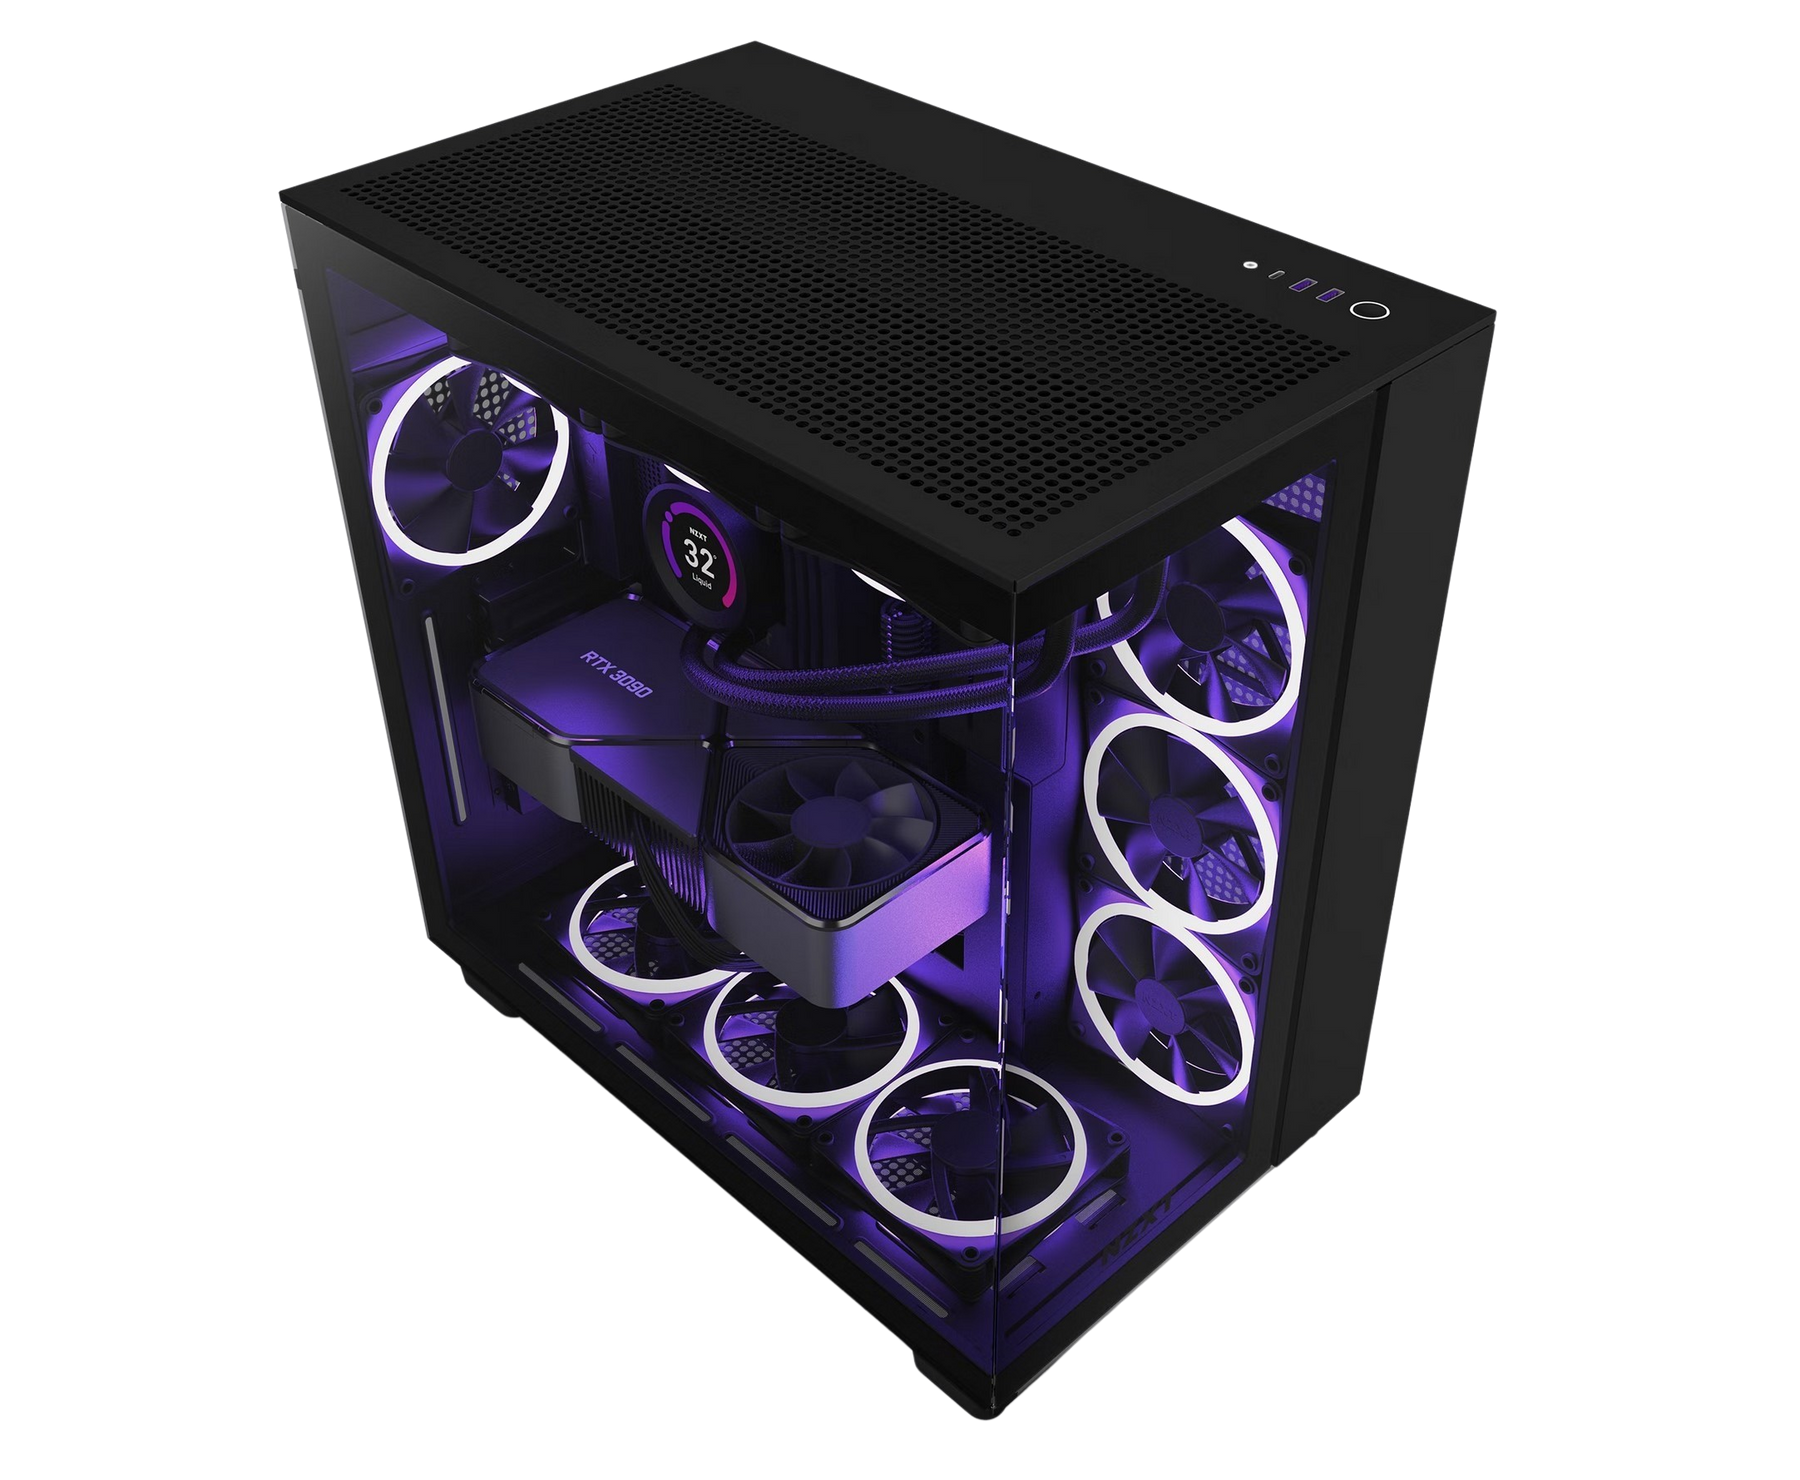 IronClad <b>NZXT special</b> <br>Large-size Gaming Tower PC